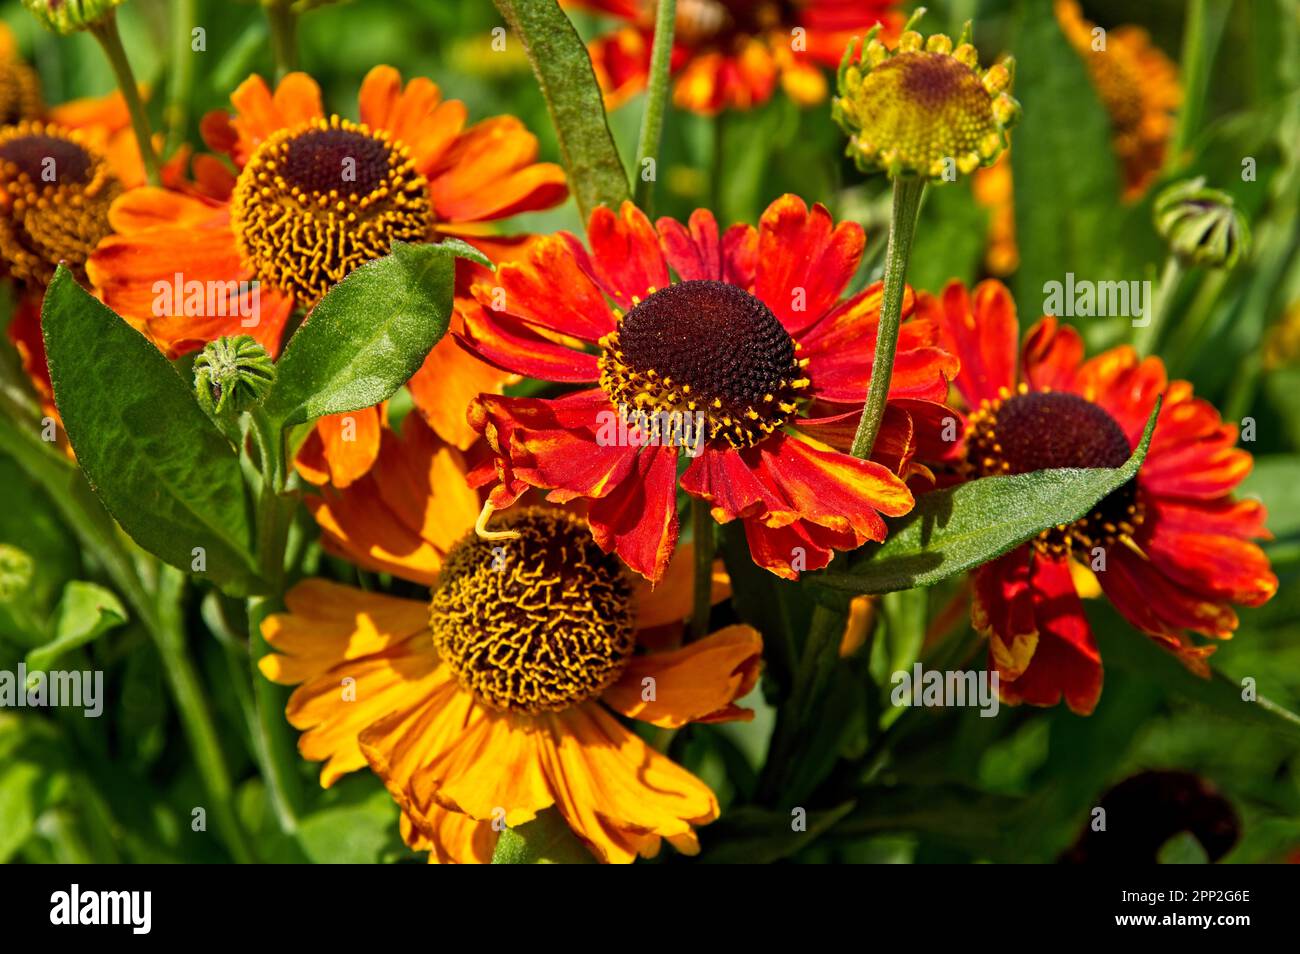 Vibrant red, orange, and yellow flower petals in a field of wildflowers Stock Photo